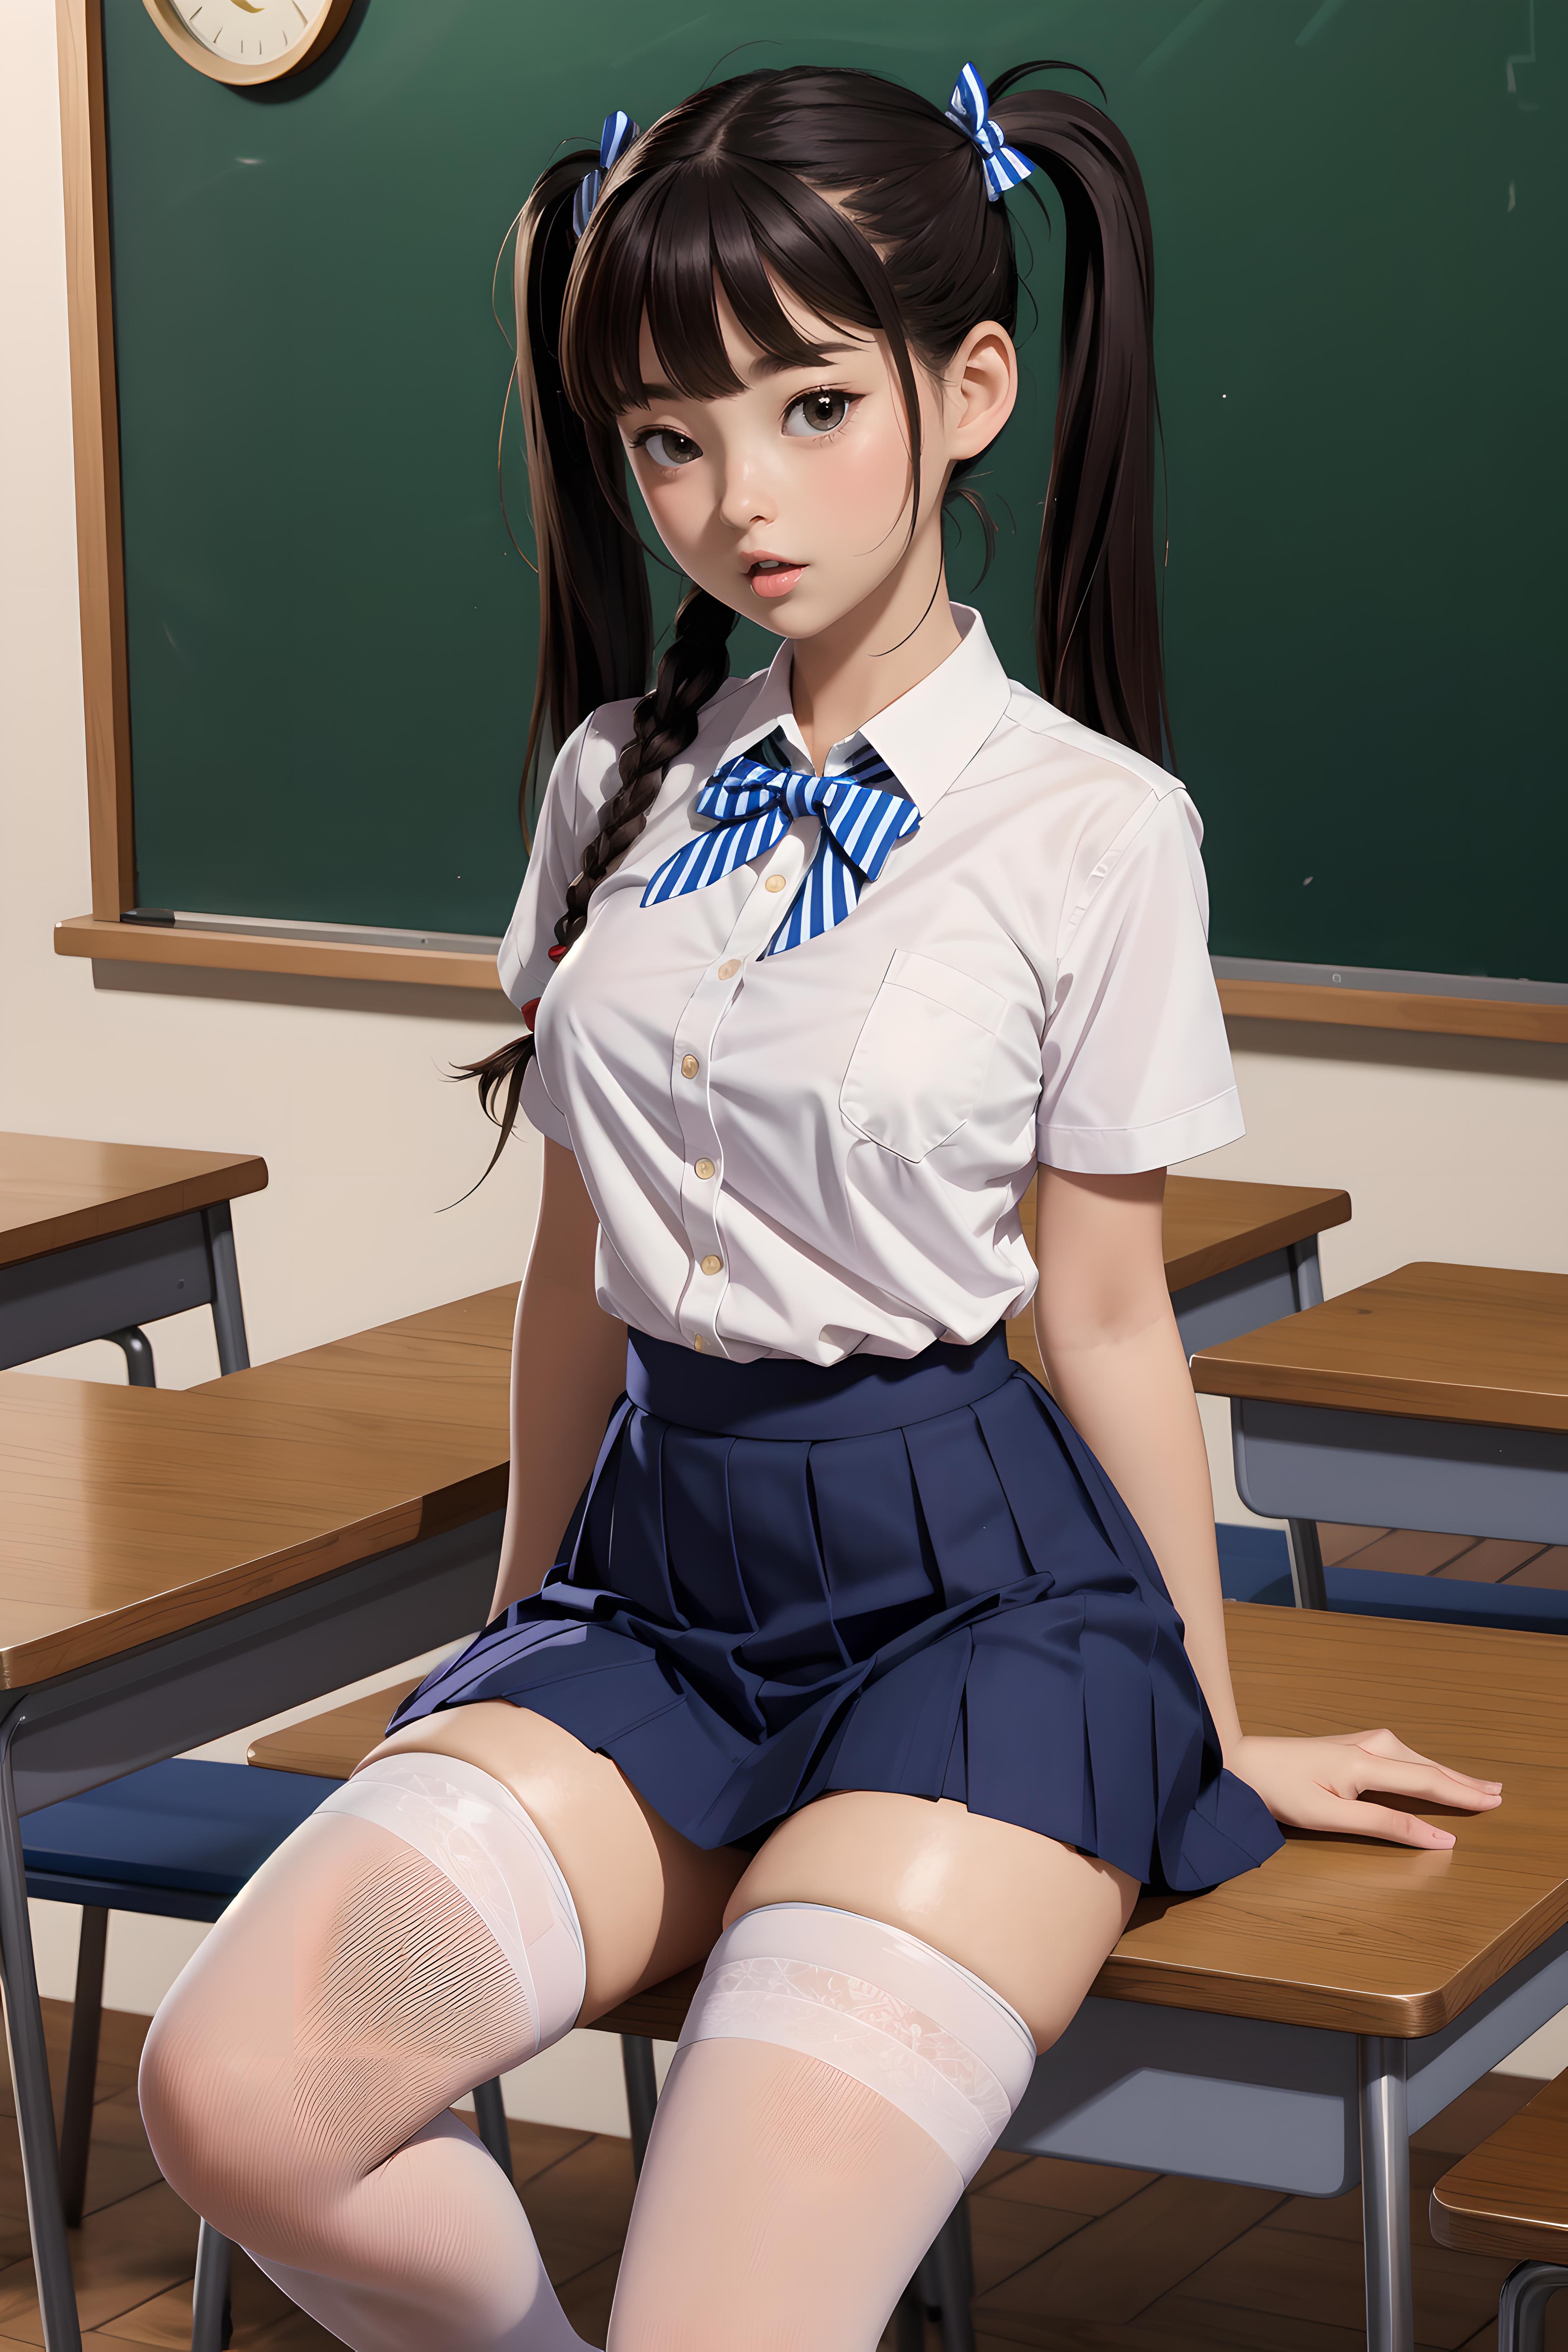 Anime-style girl sitting on a chair in a classroom.